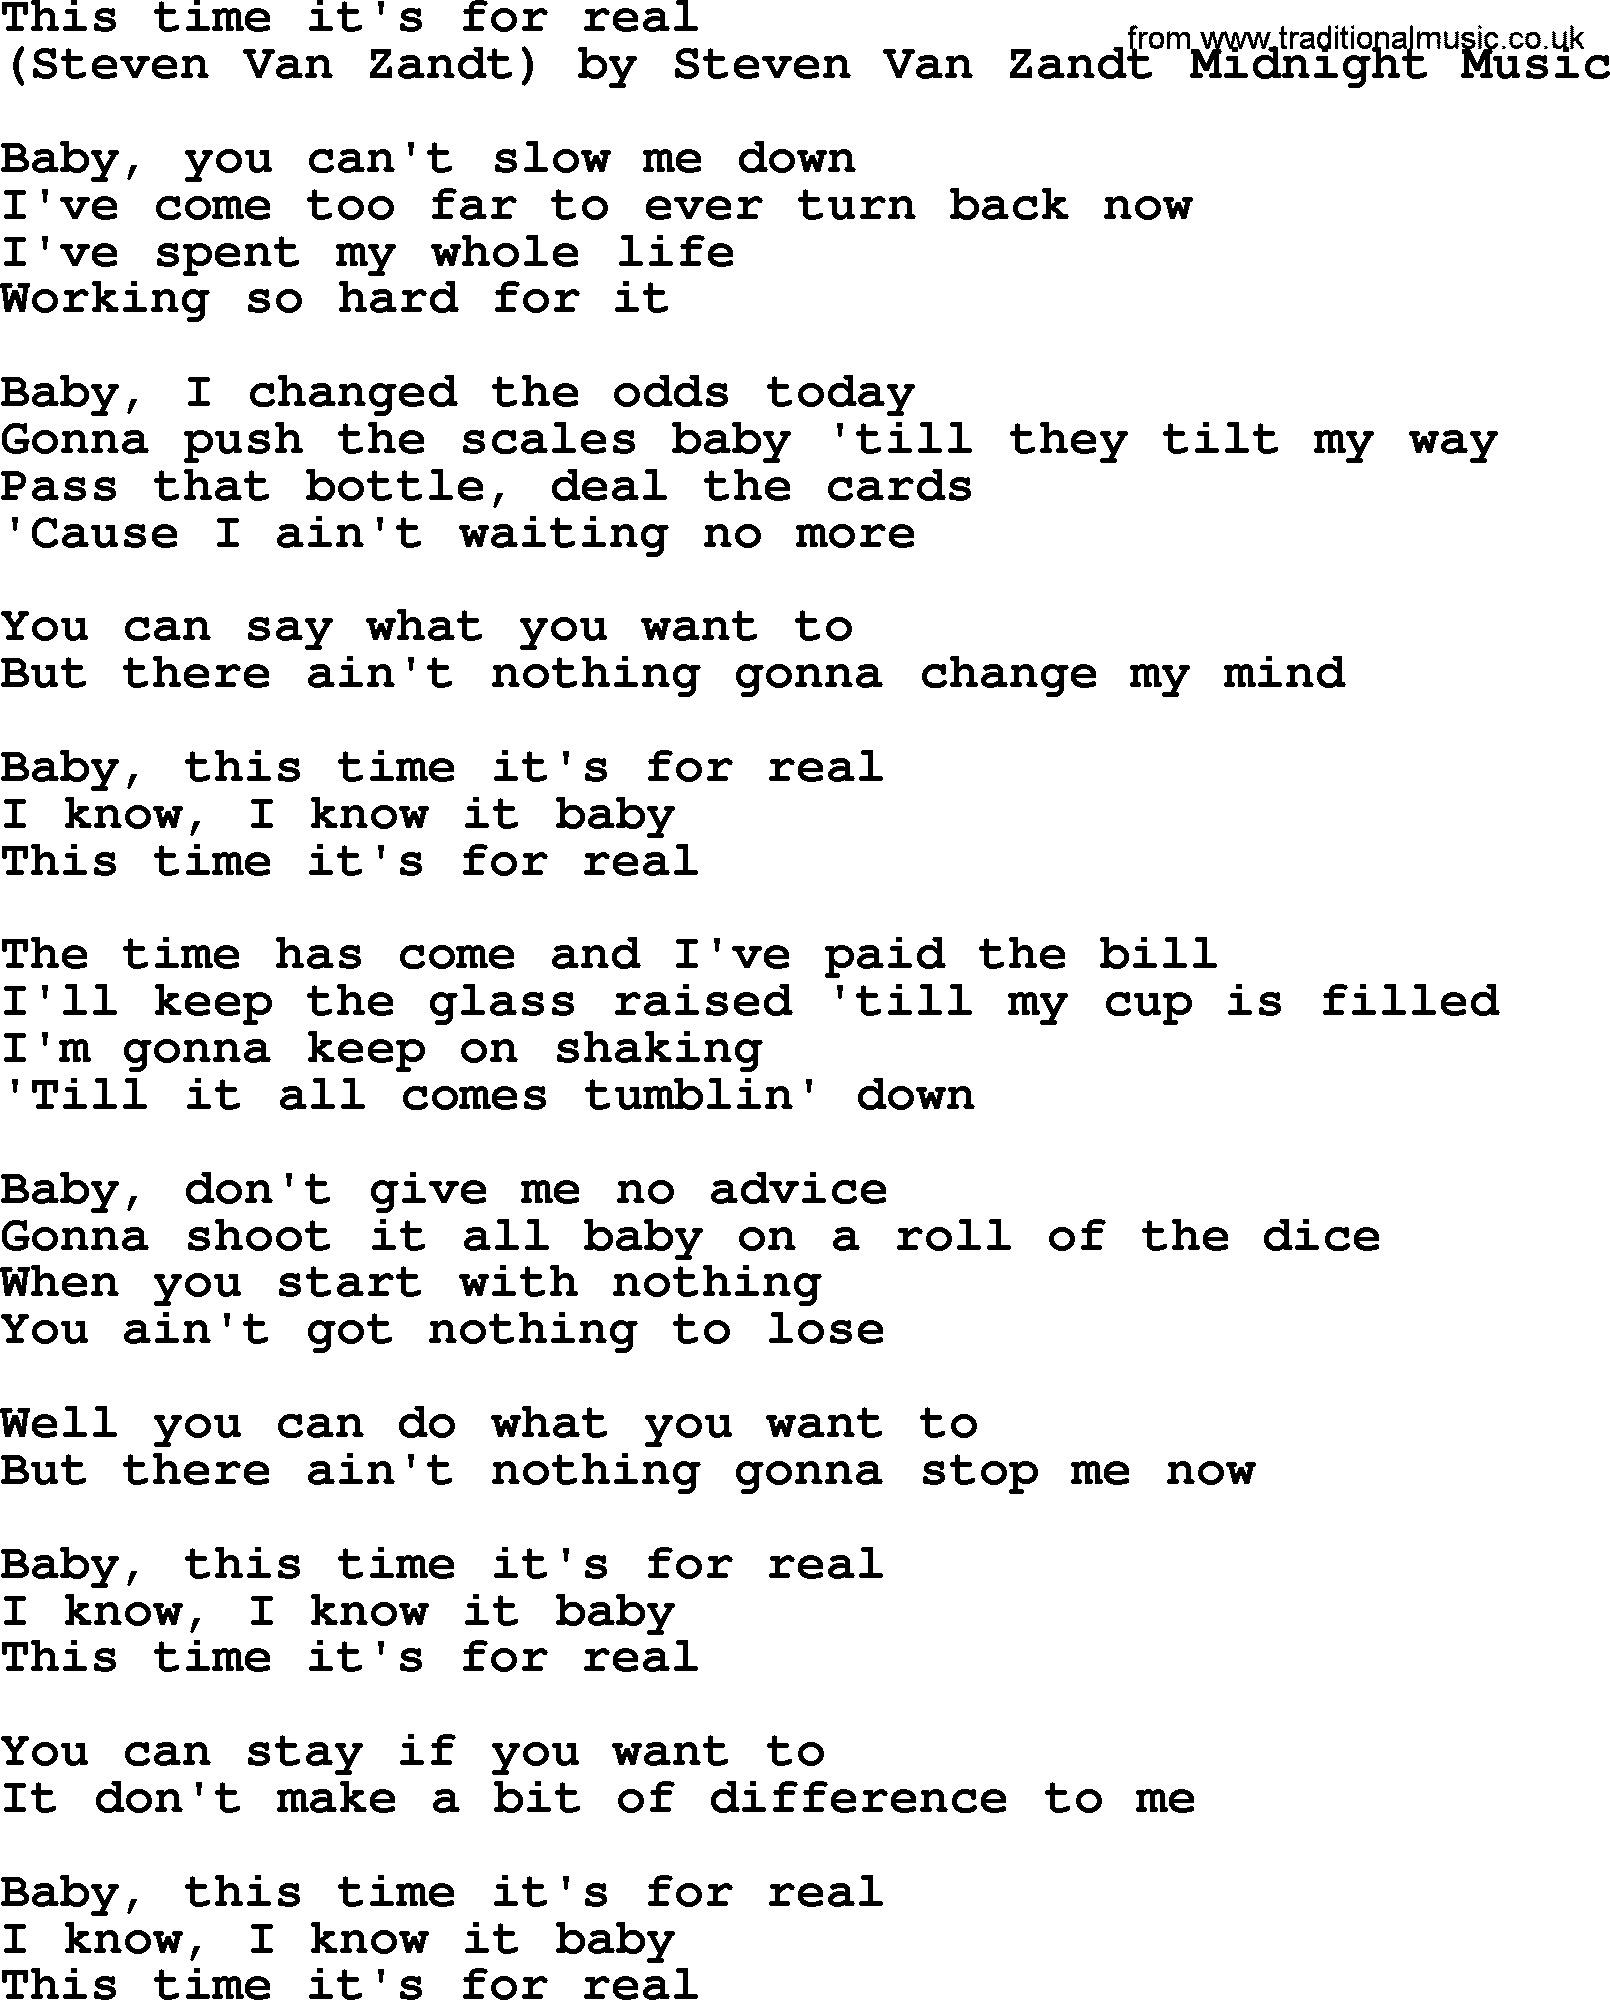 Bruce Springsteen song: This Time It's For Real lyrics